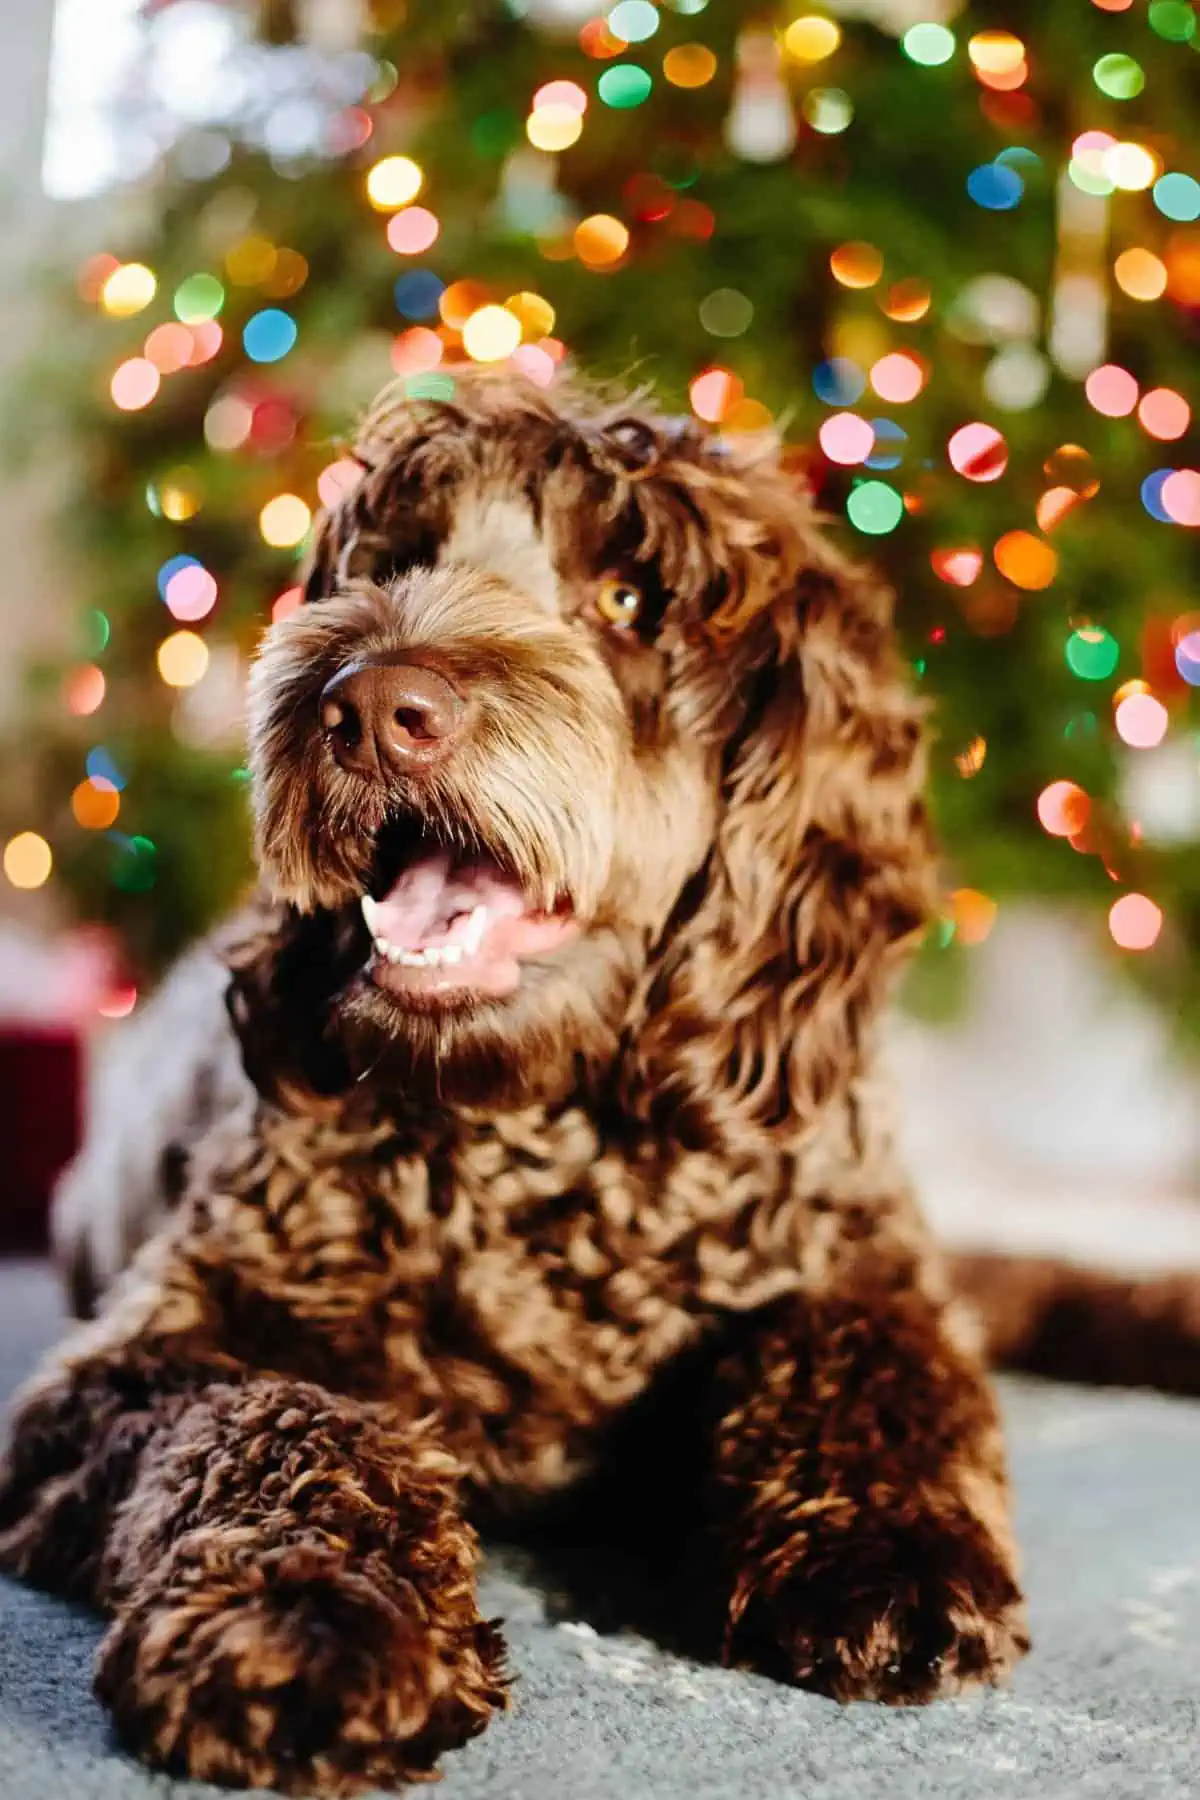 A close up of a dog in front of a Christmas tree.